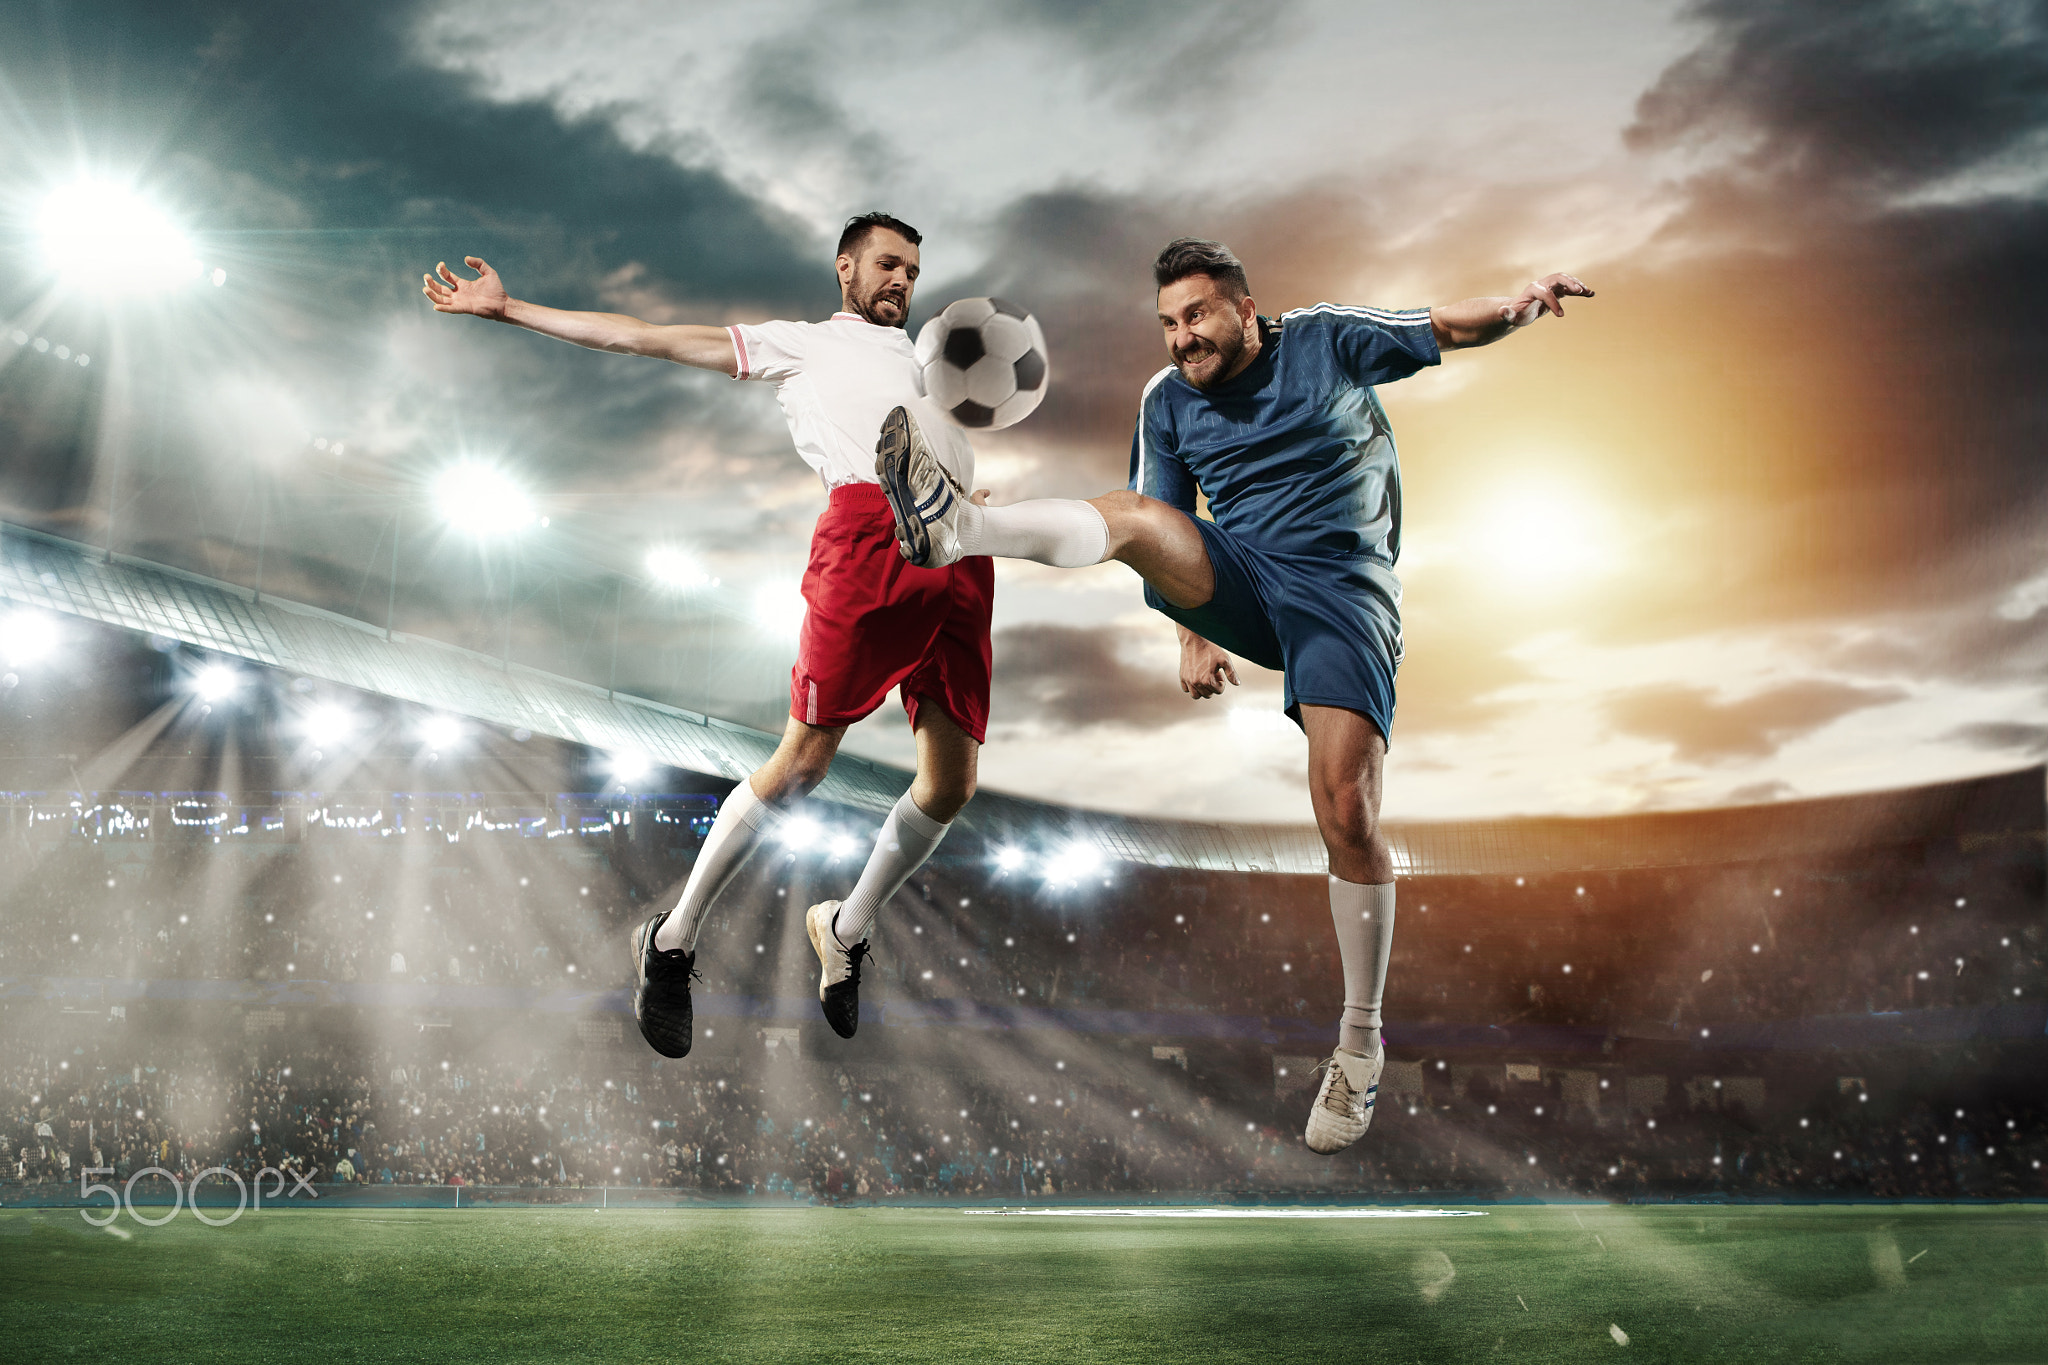 Two men are playing soccer and they compete with each other